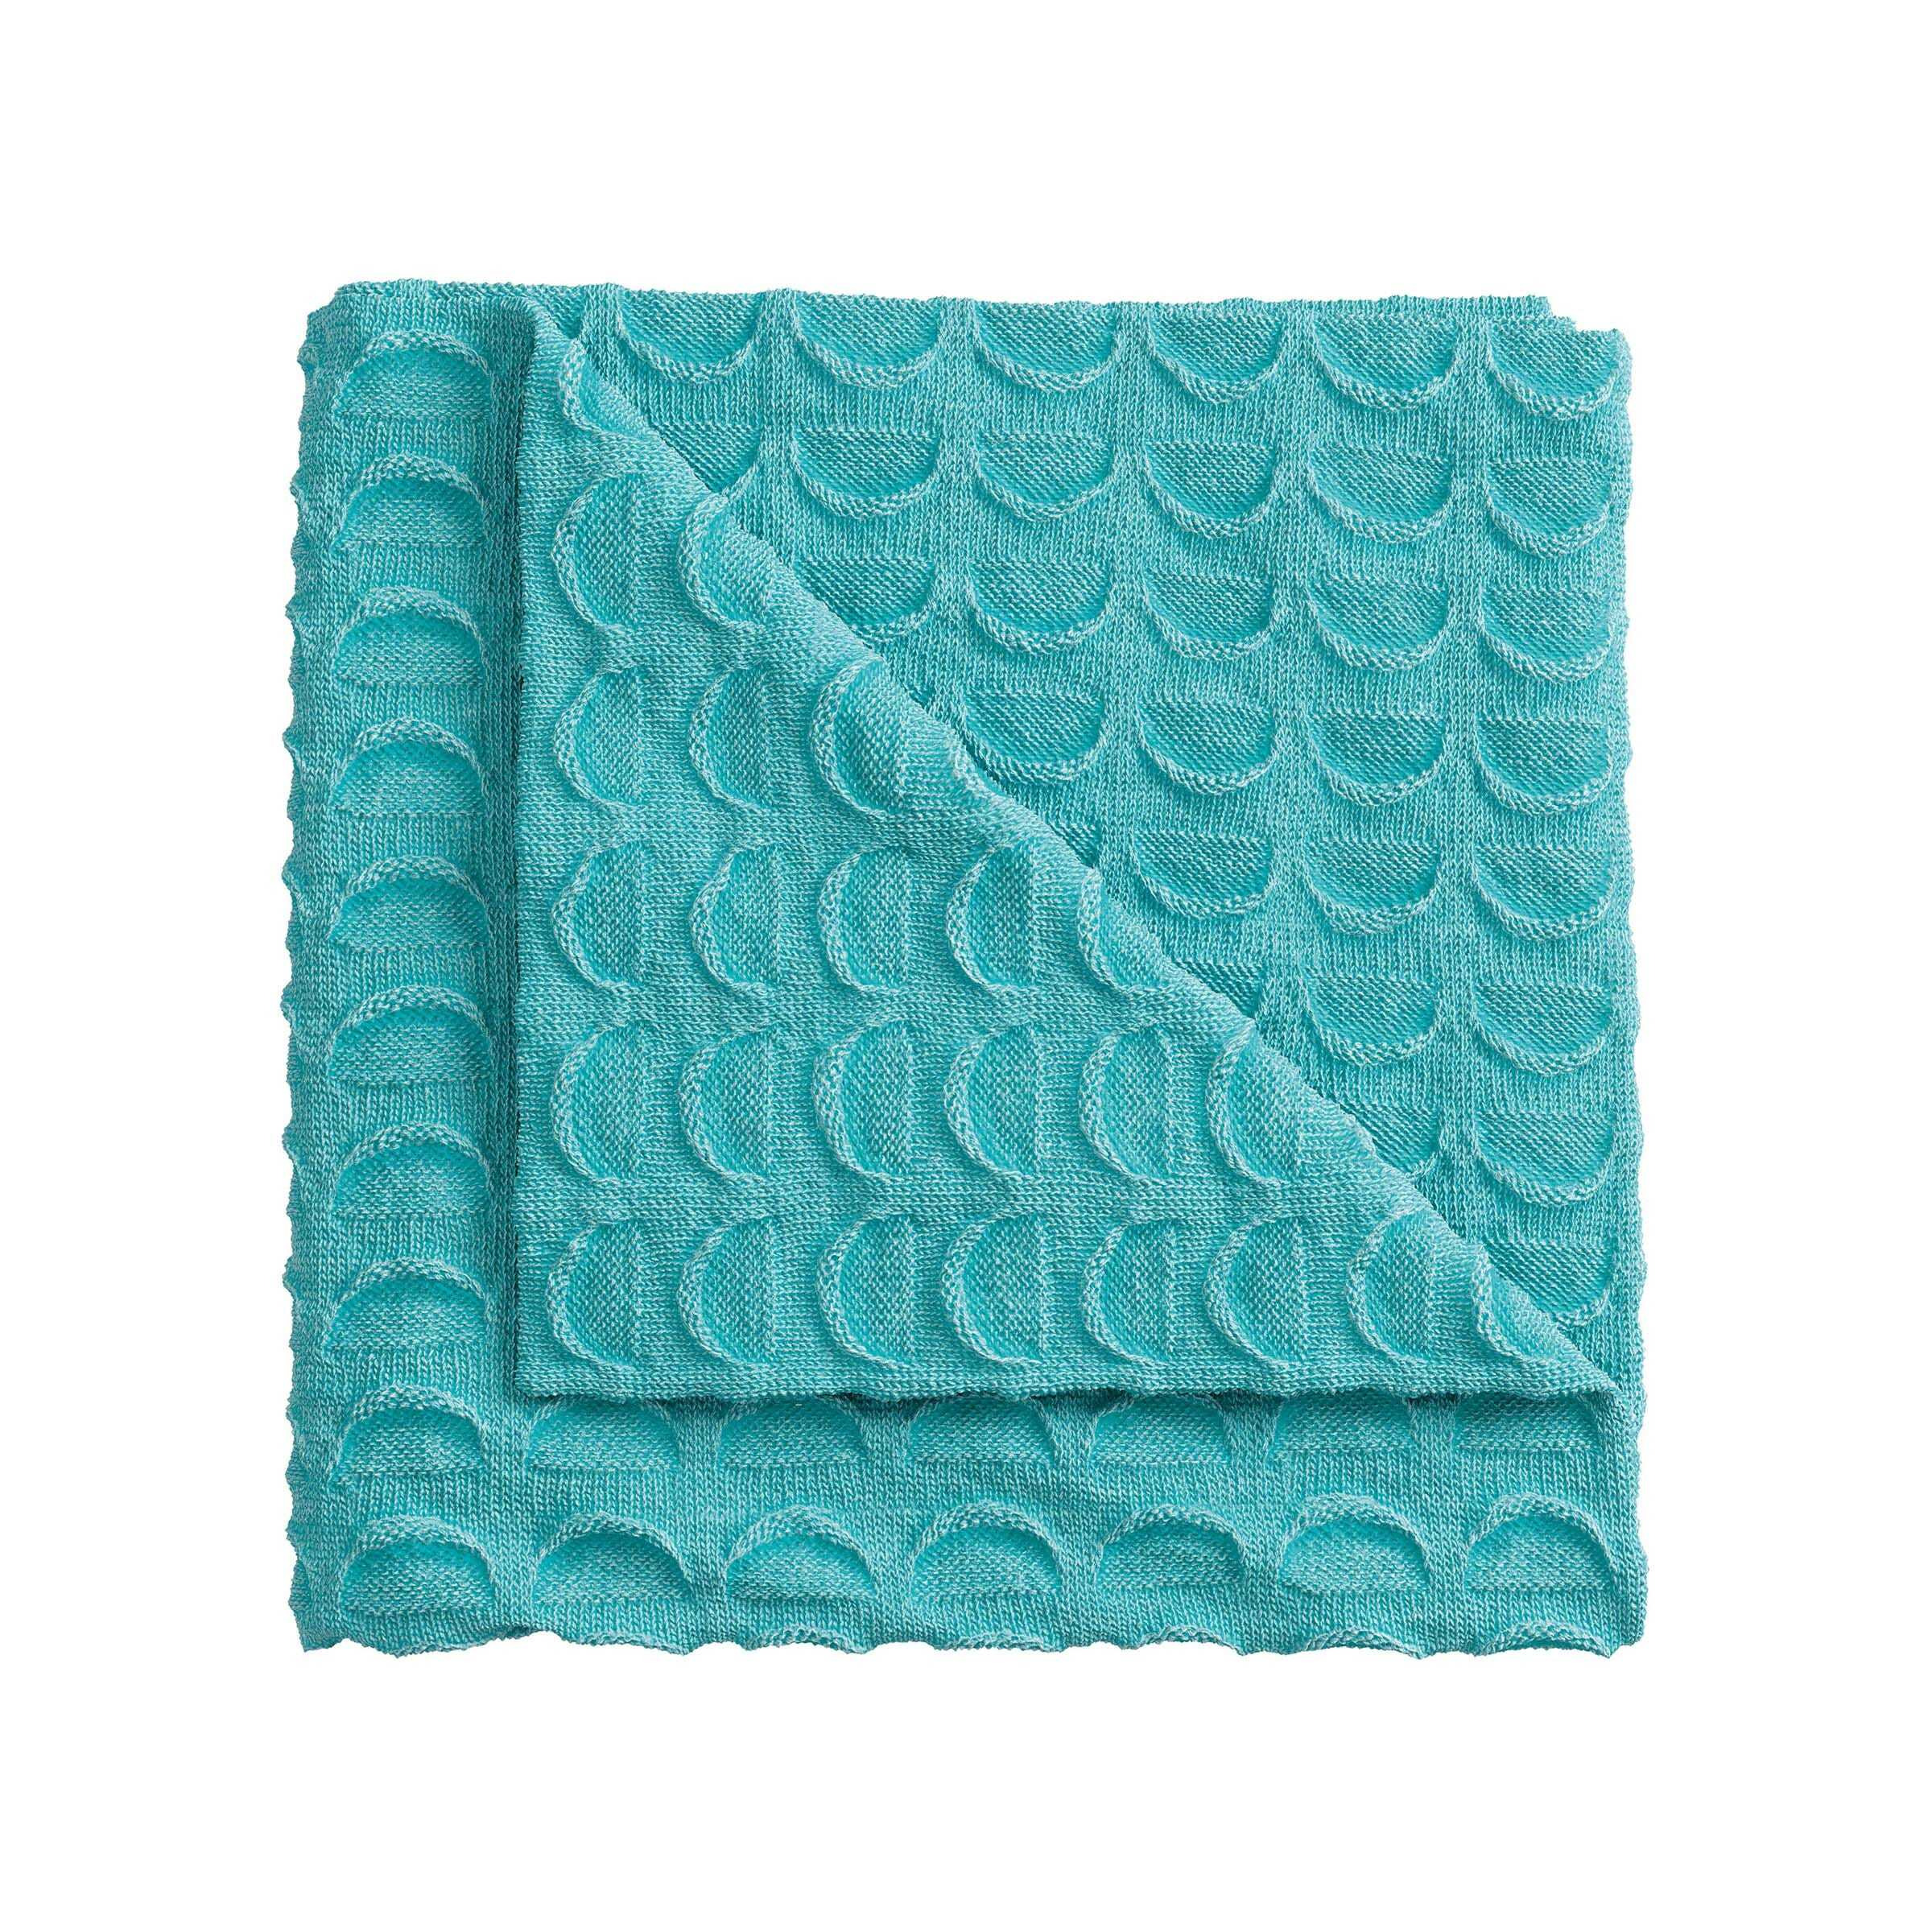 Helena Springfield Mimi Knitted Throw, Turquoise - image 1